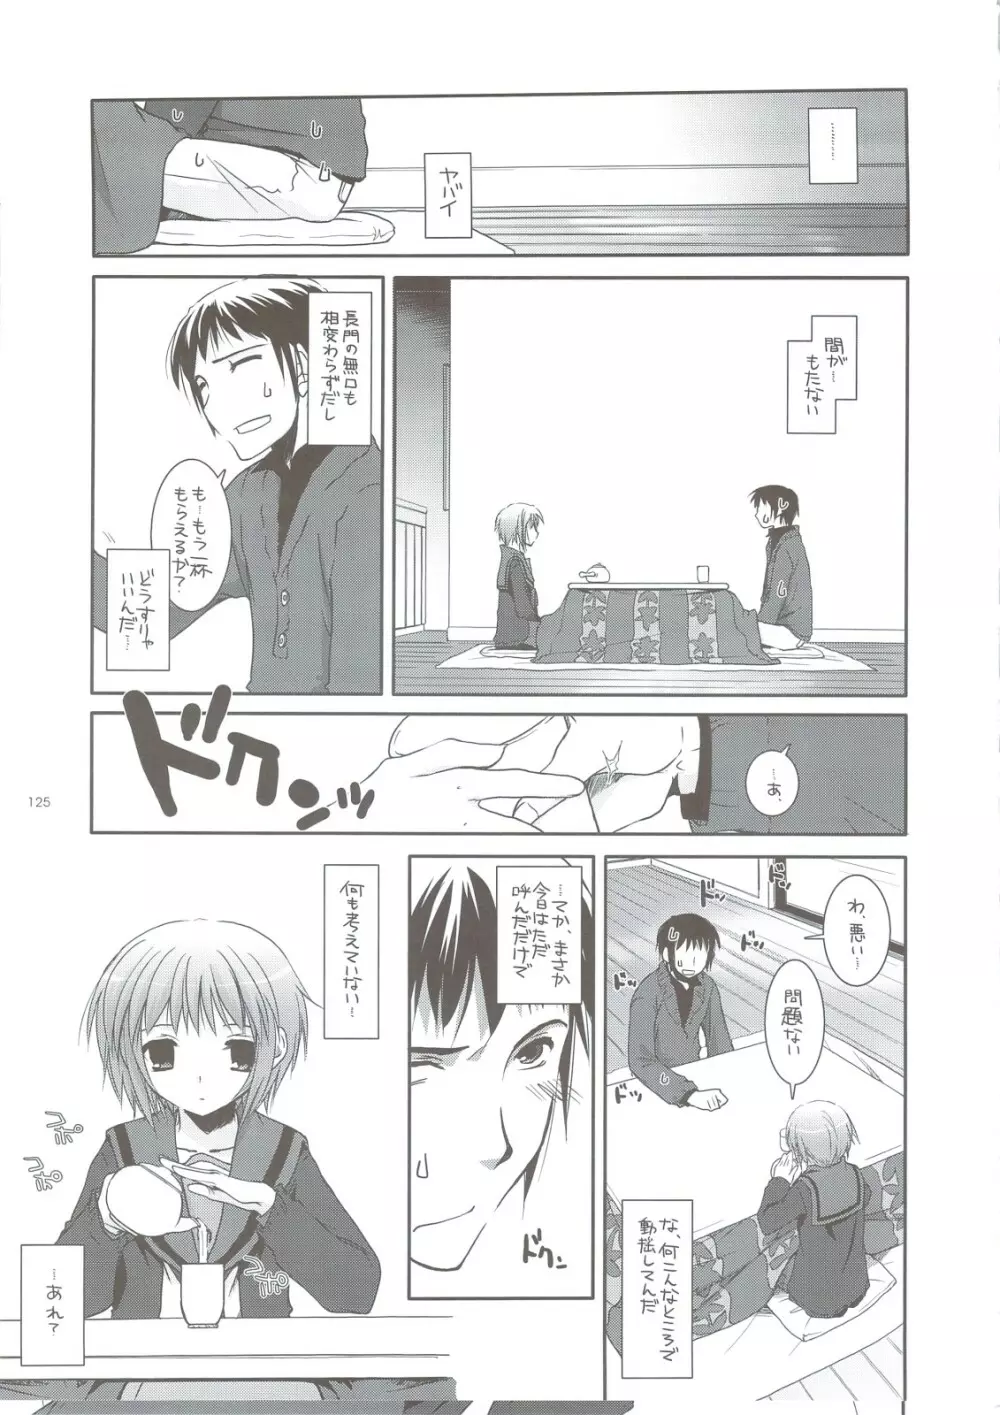 DL-SOS 総集編 - page120